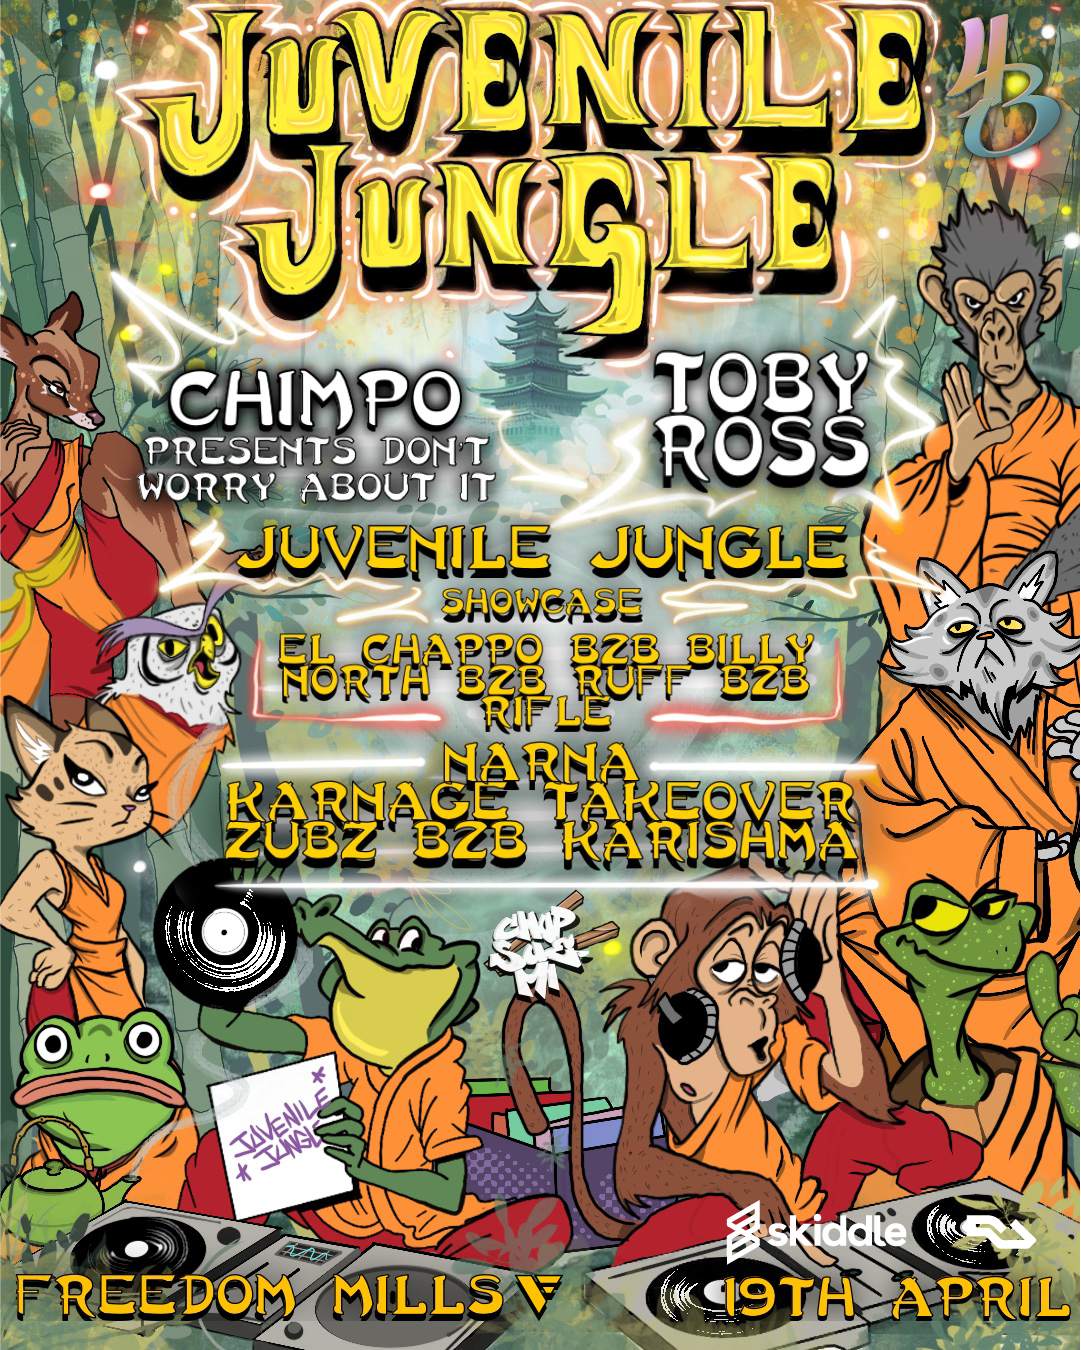 Juvenile Jungle presents: Chimpo, TOBY ROSS  - Flyer-Vorderseite